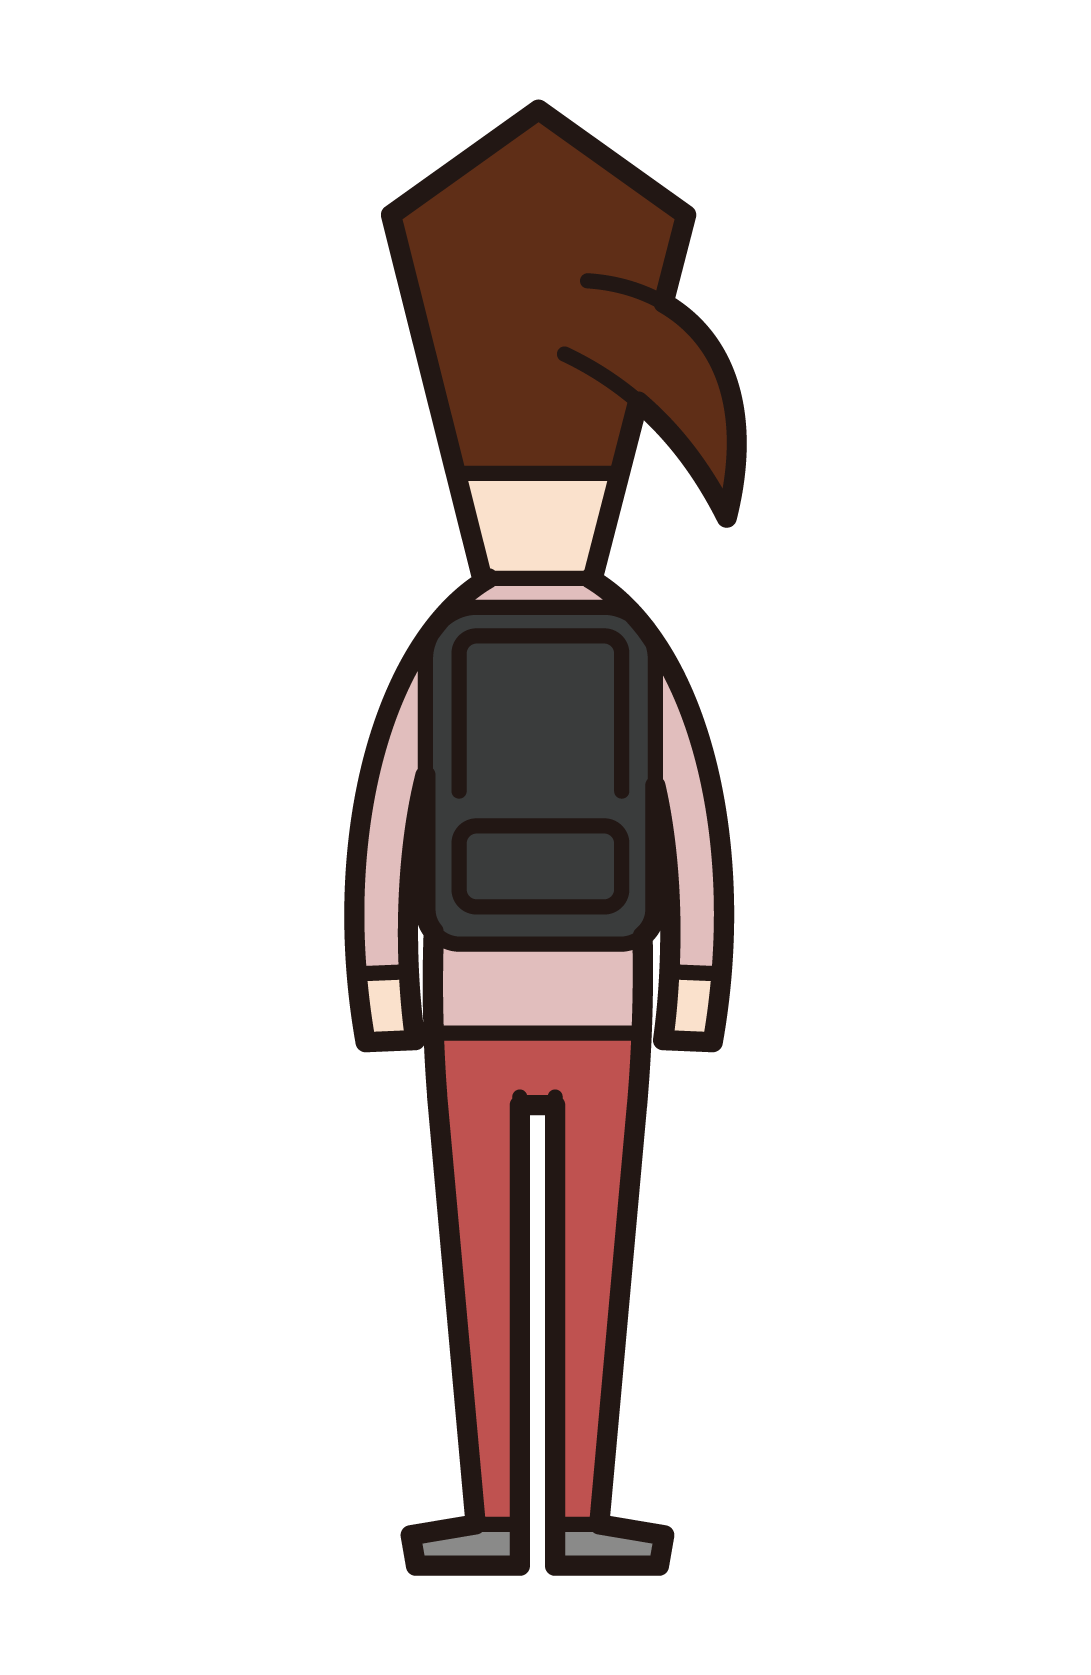 Illustration of the back of a person (woman) carrying a backpack